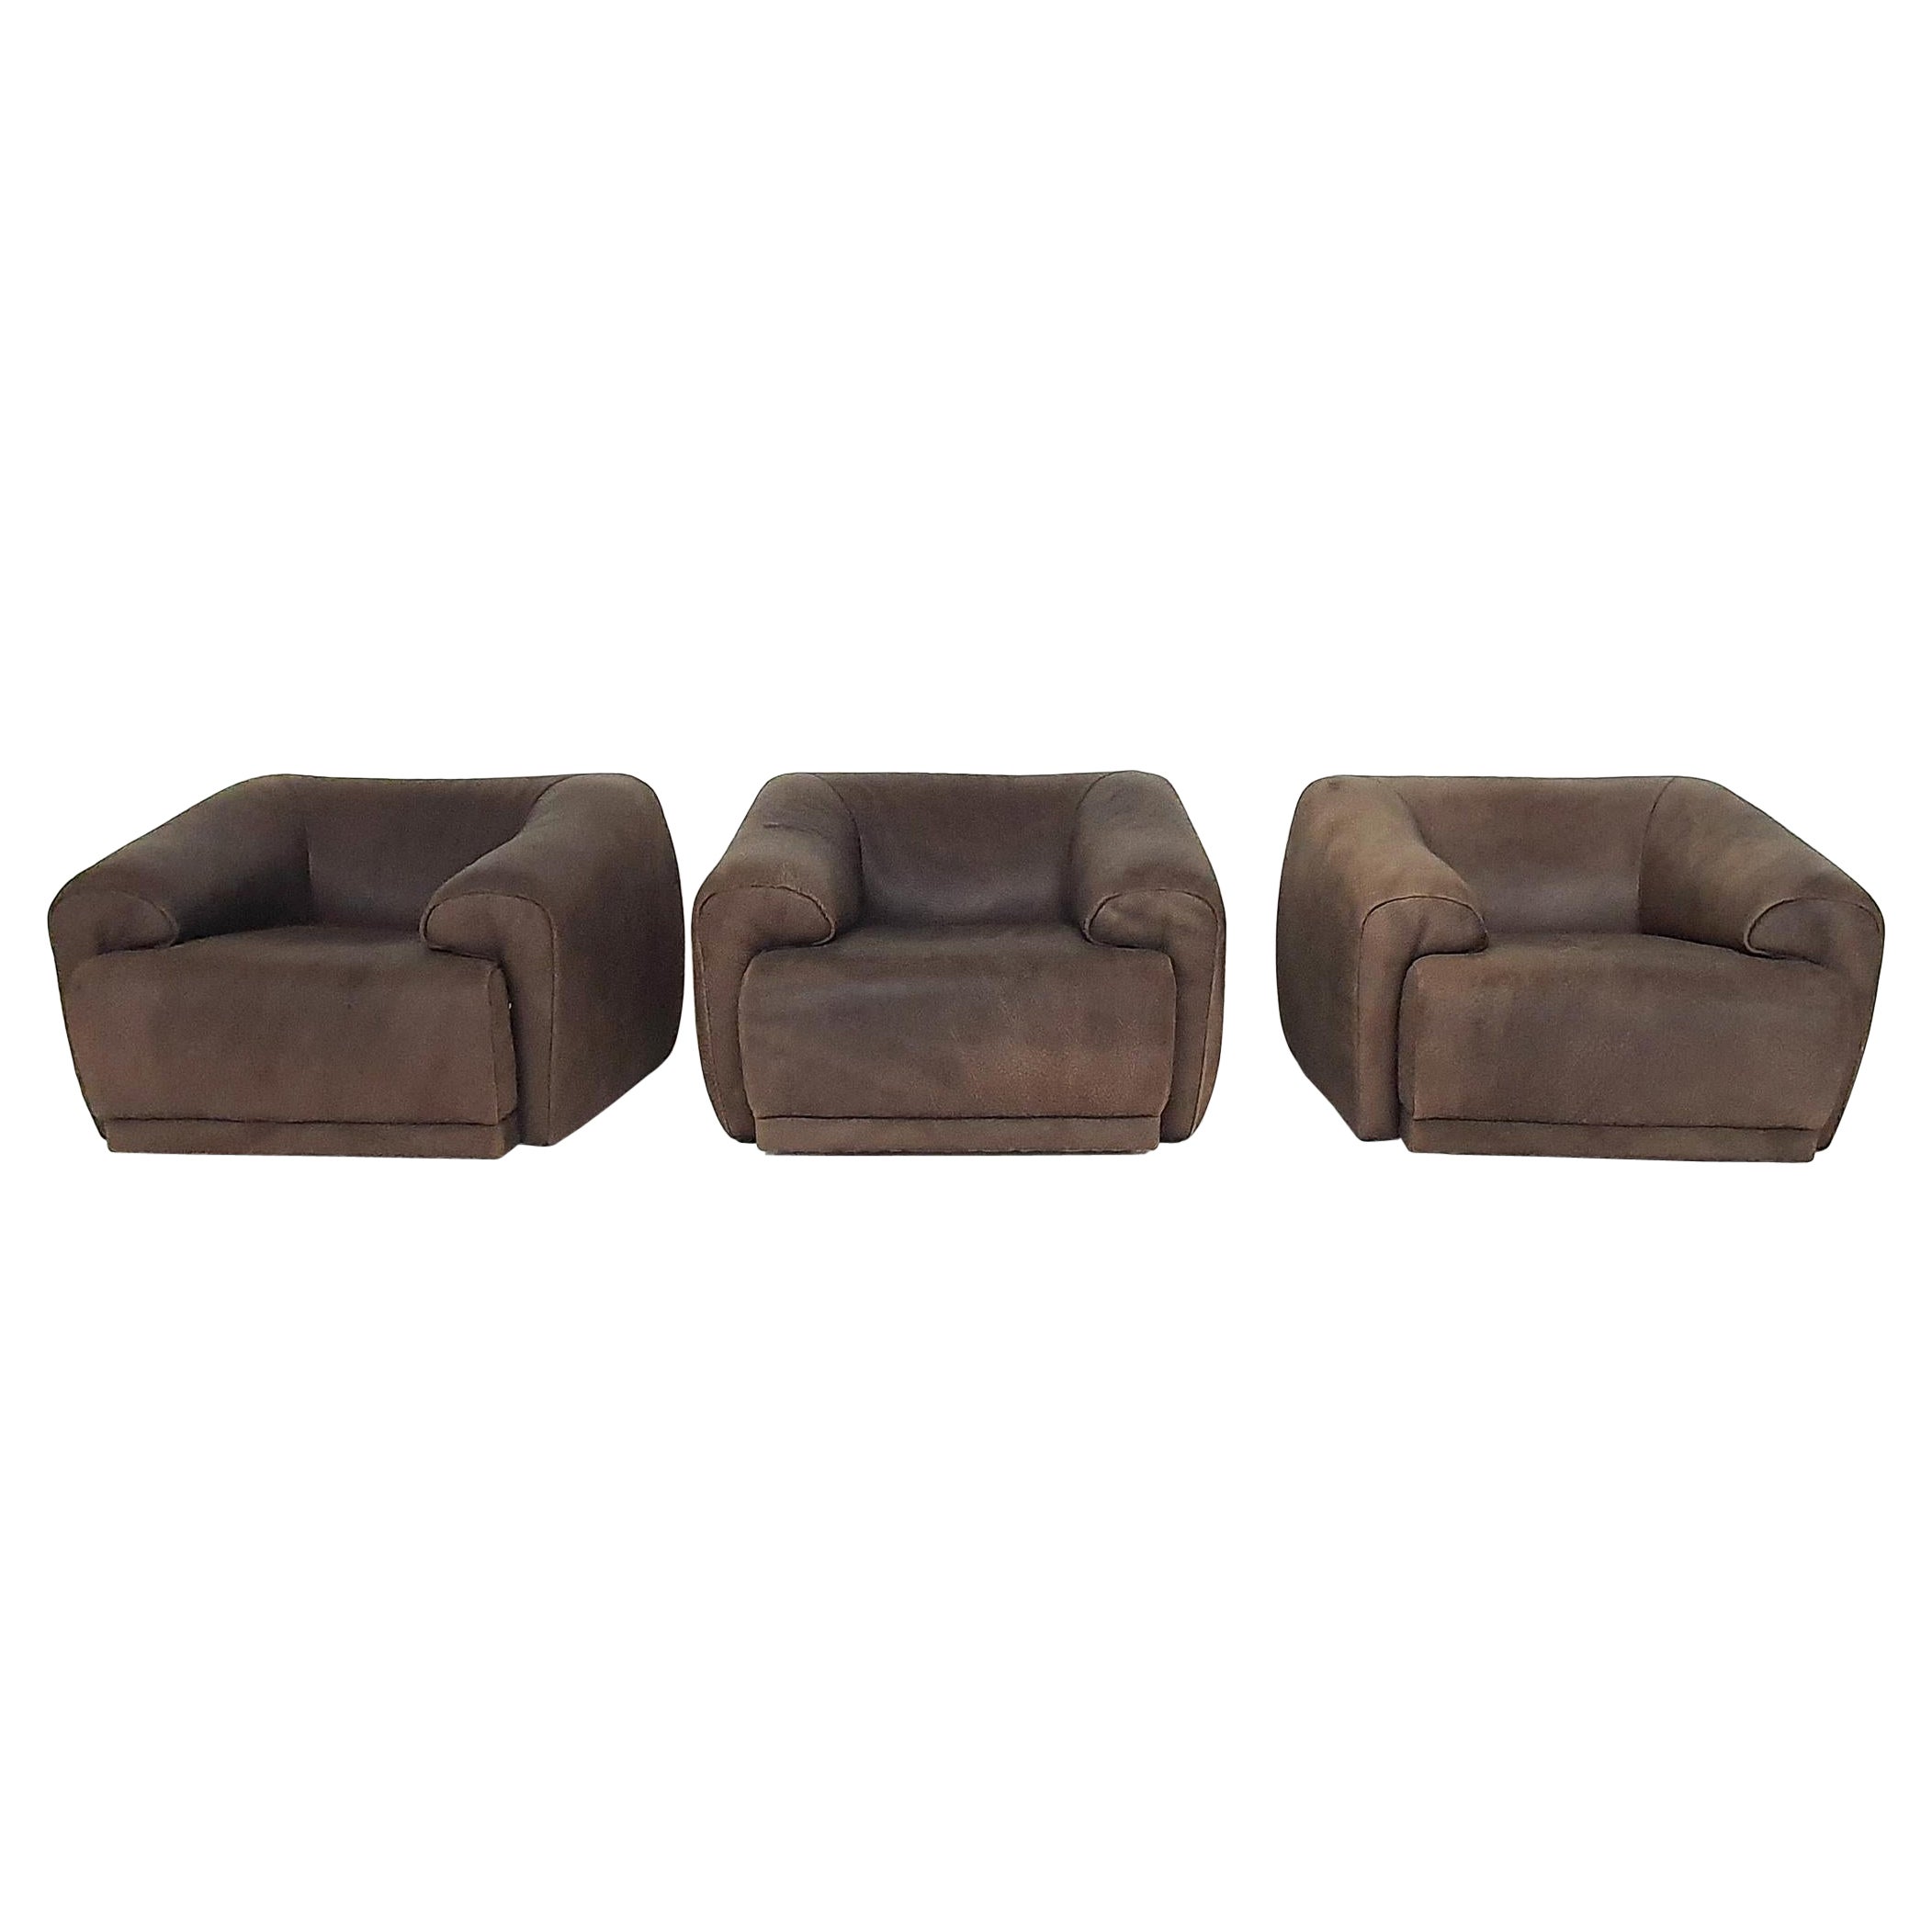 Thick brown buffalo leather lounge chairs in the Style of the model DS47 from th For Sale